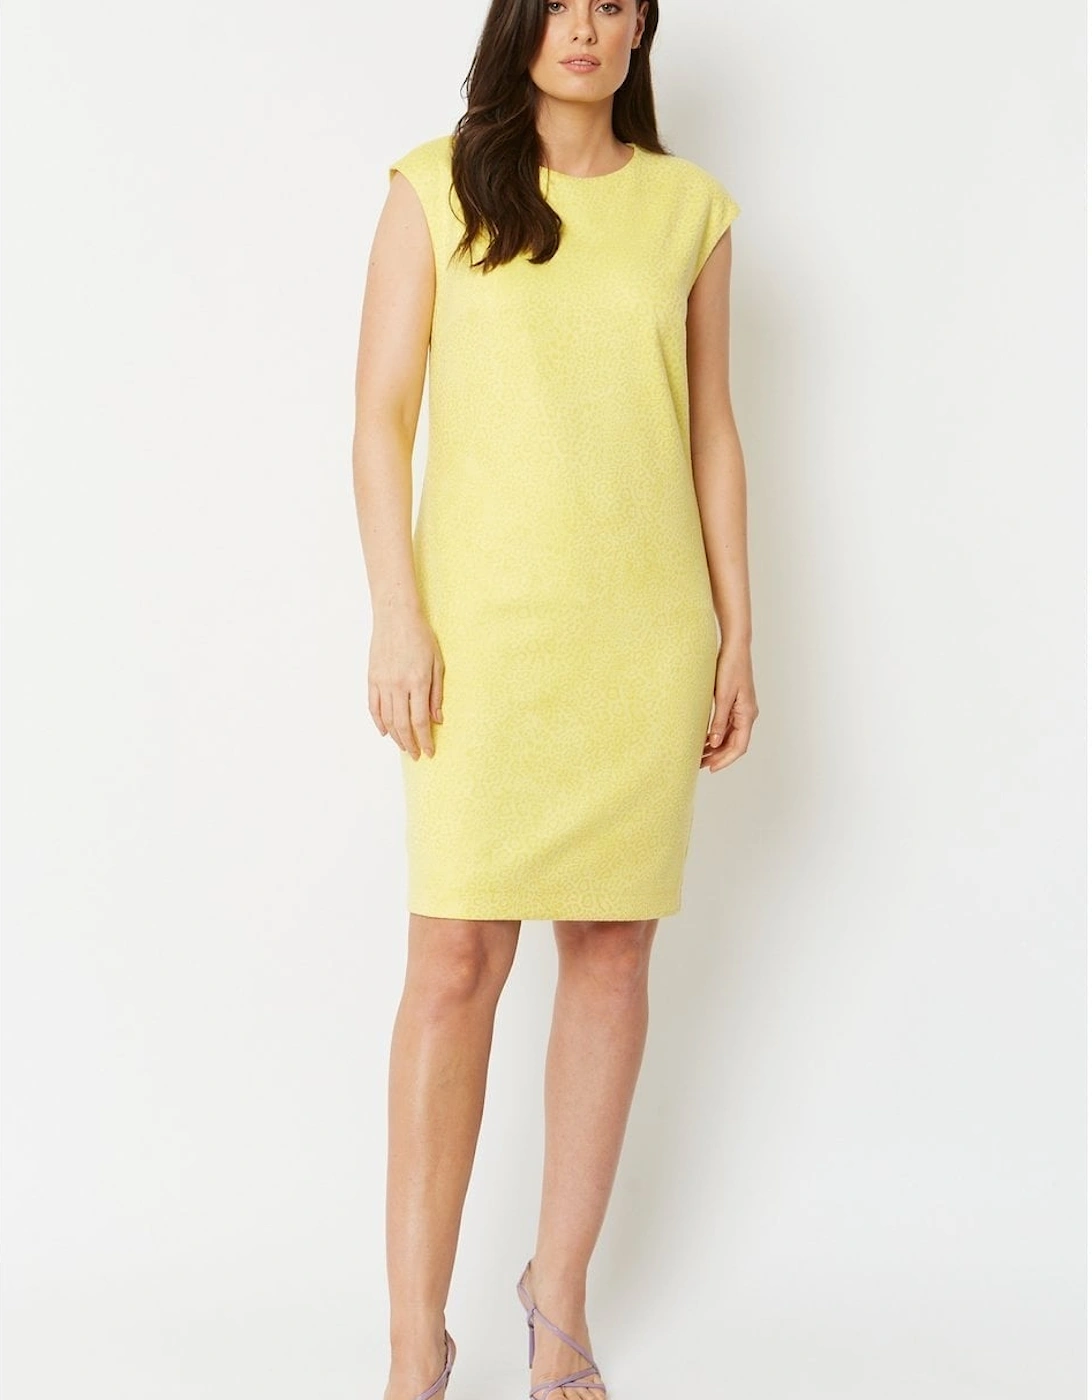 Yellow Faux Suede Animal Print Dress